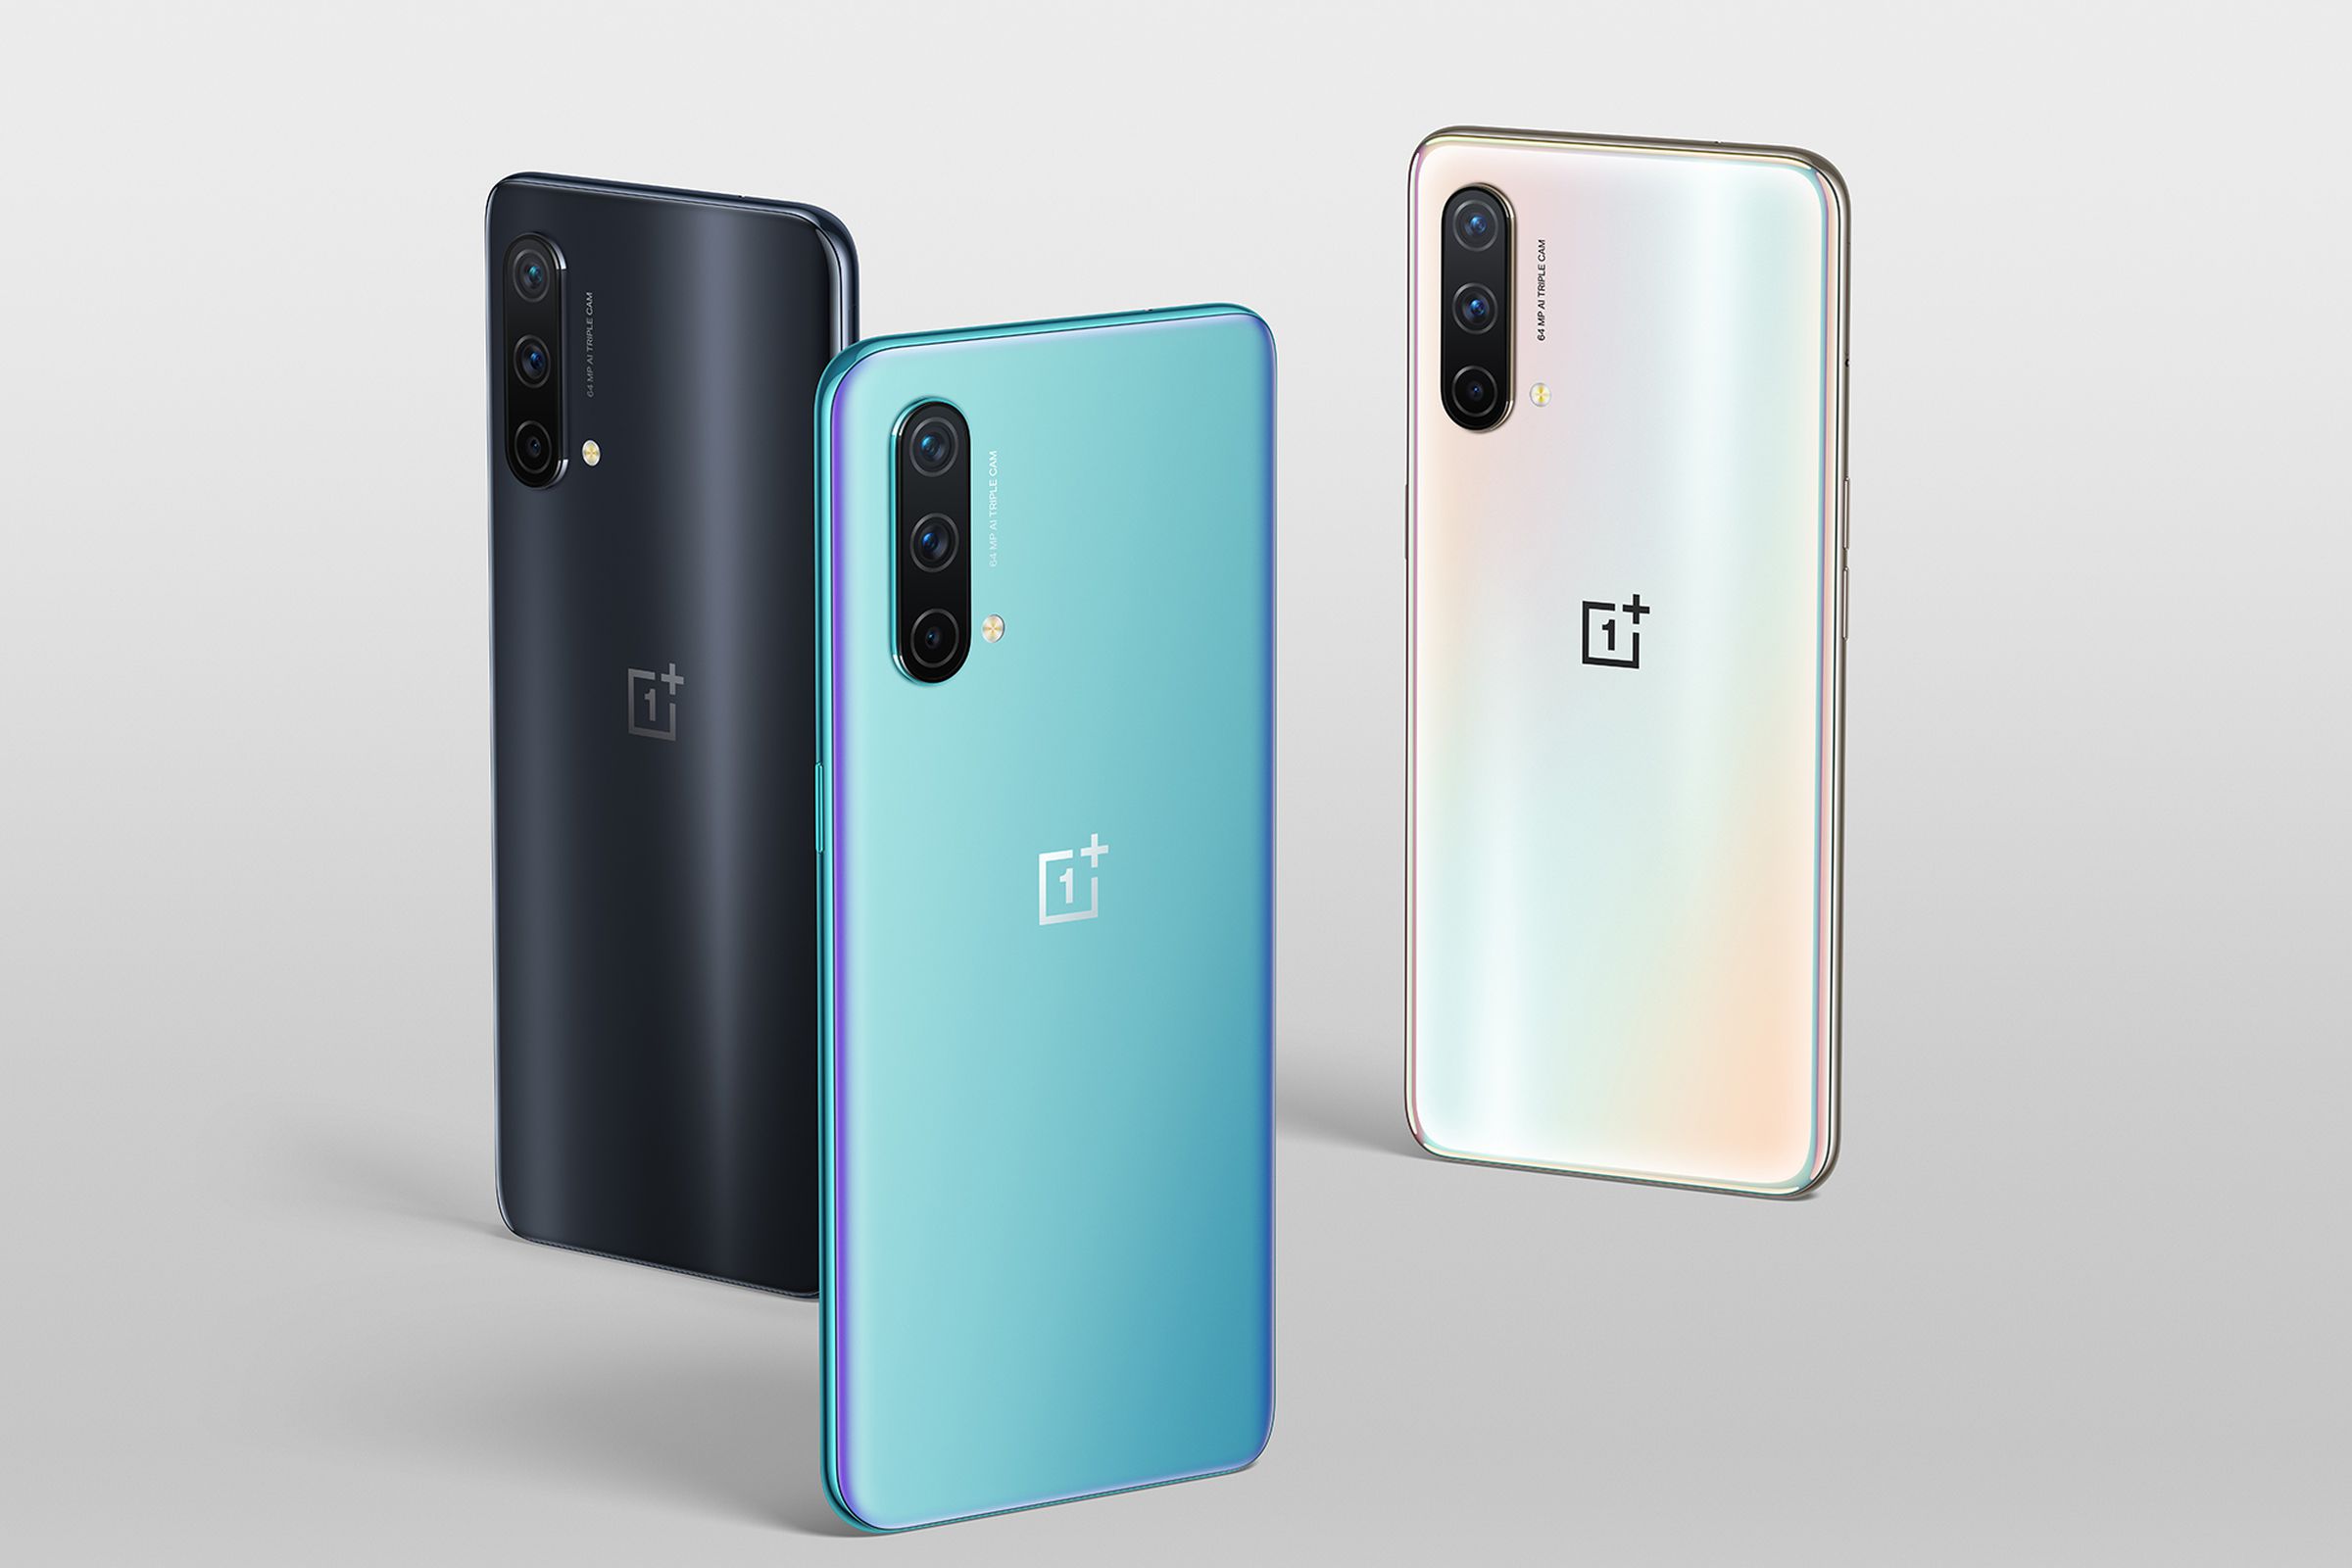 The OnePlus Nord CE 5G will be available in black, blue, and silver.